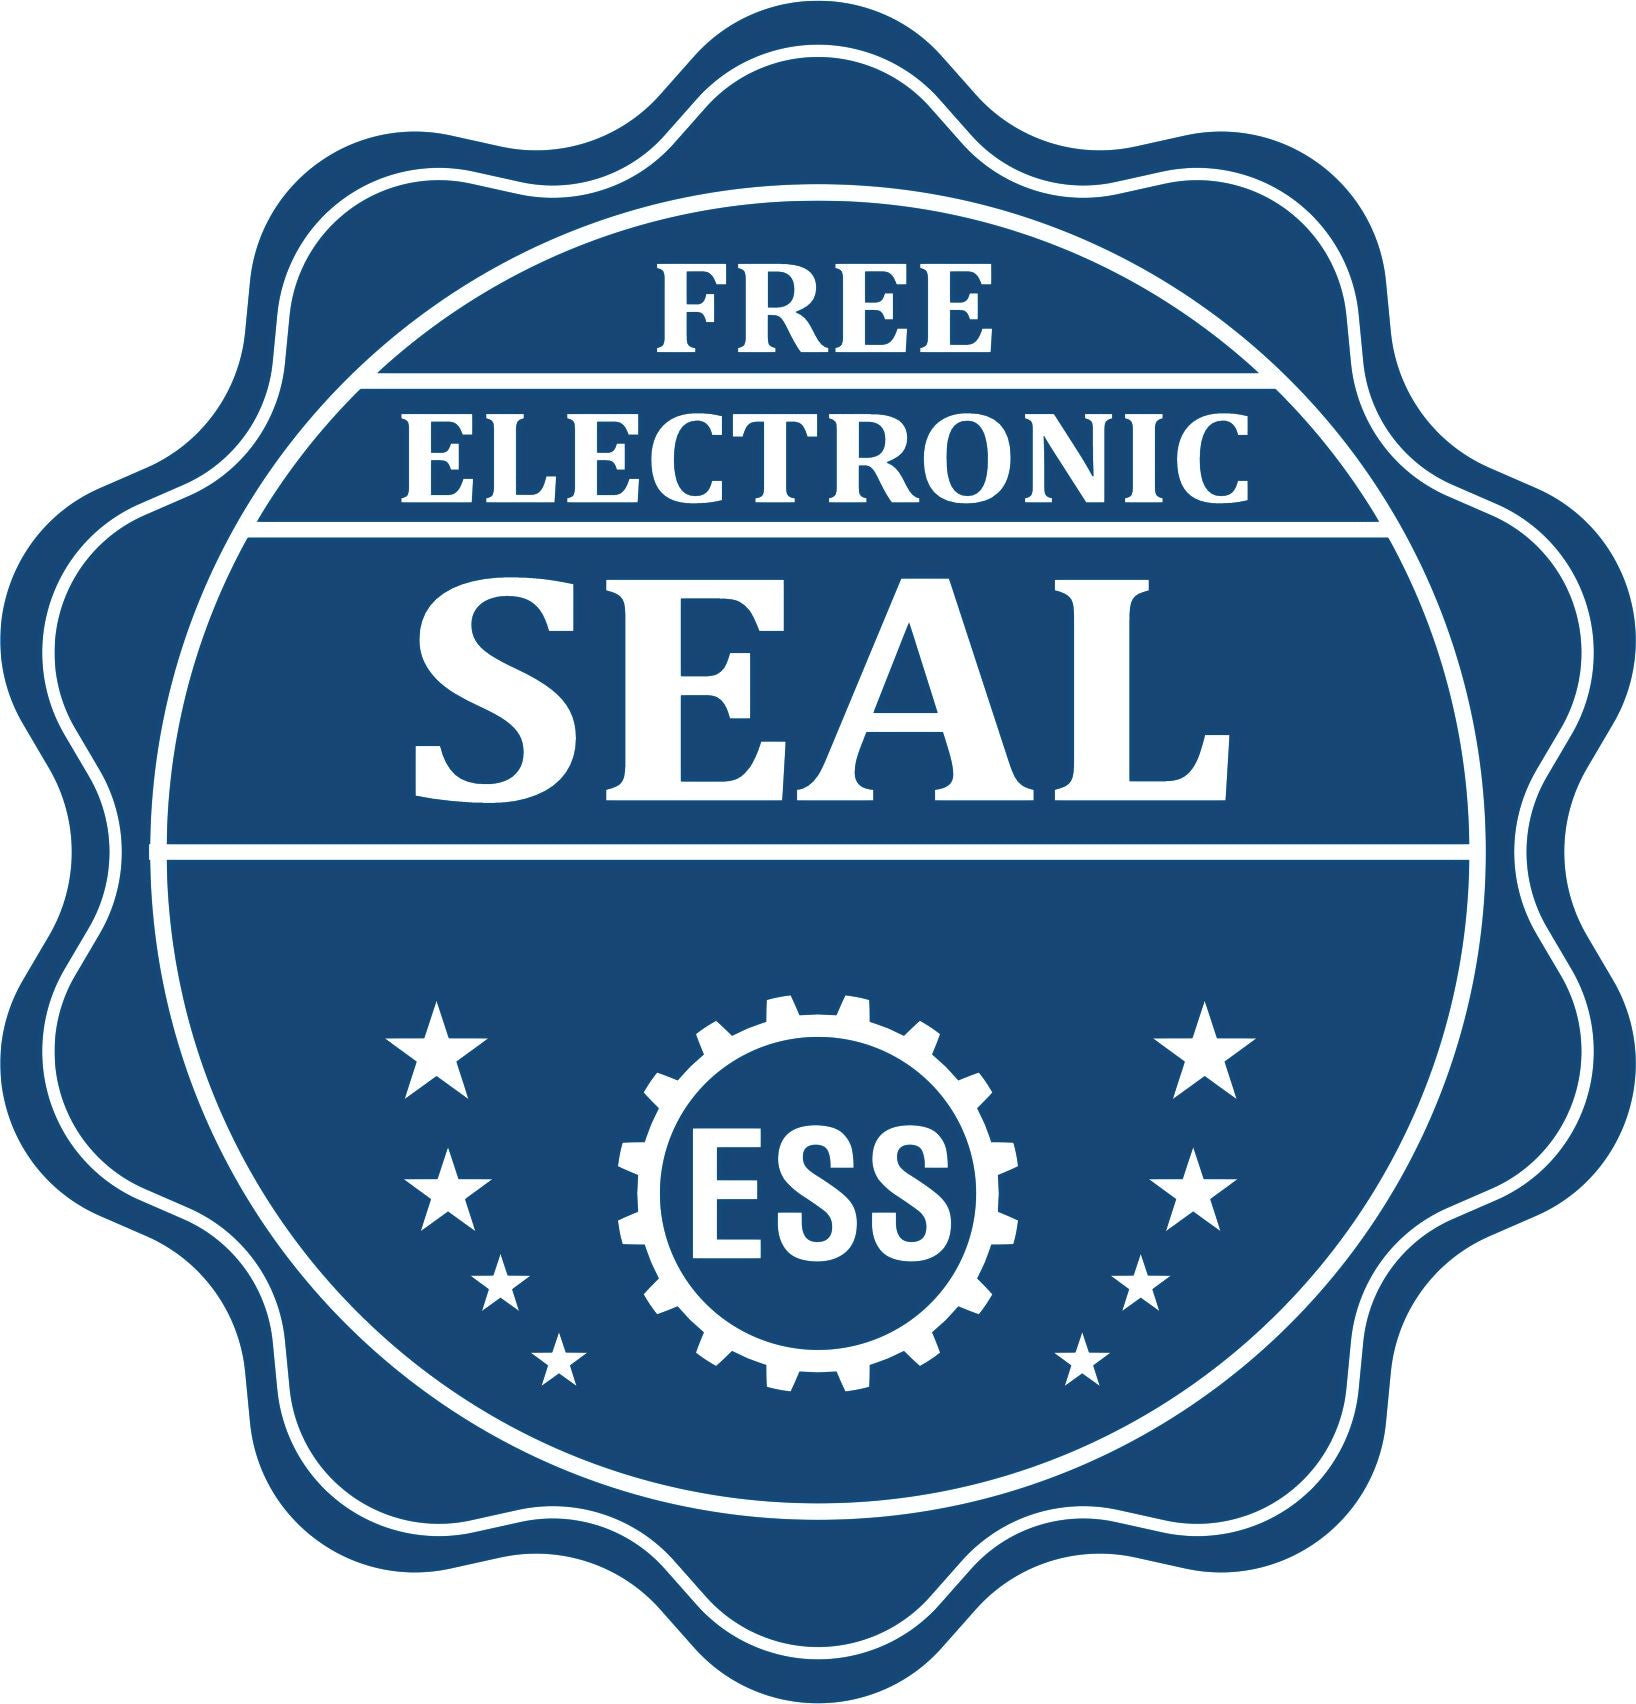 A badge showing a free electronic seal for the Handheld Idaho Professional Engineer Embosser with stars and the ESS gear on the emblem.